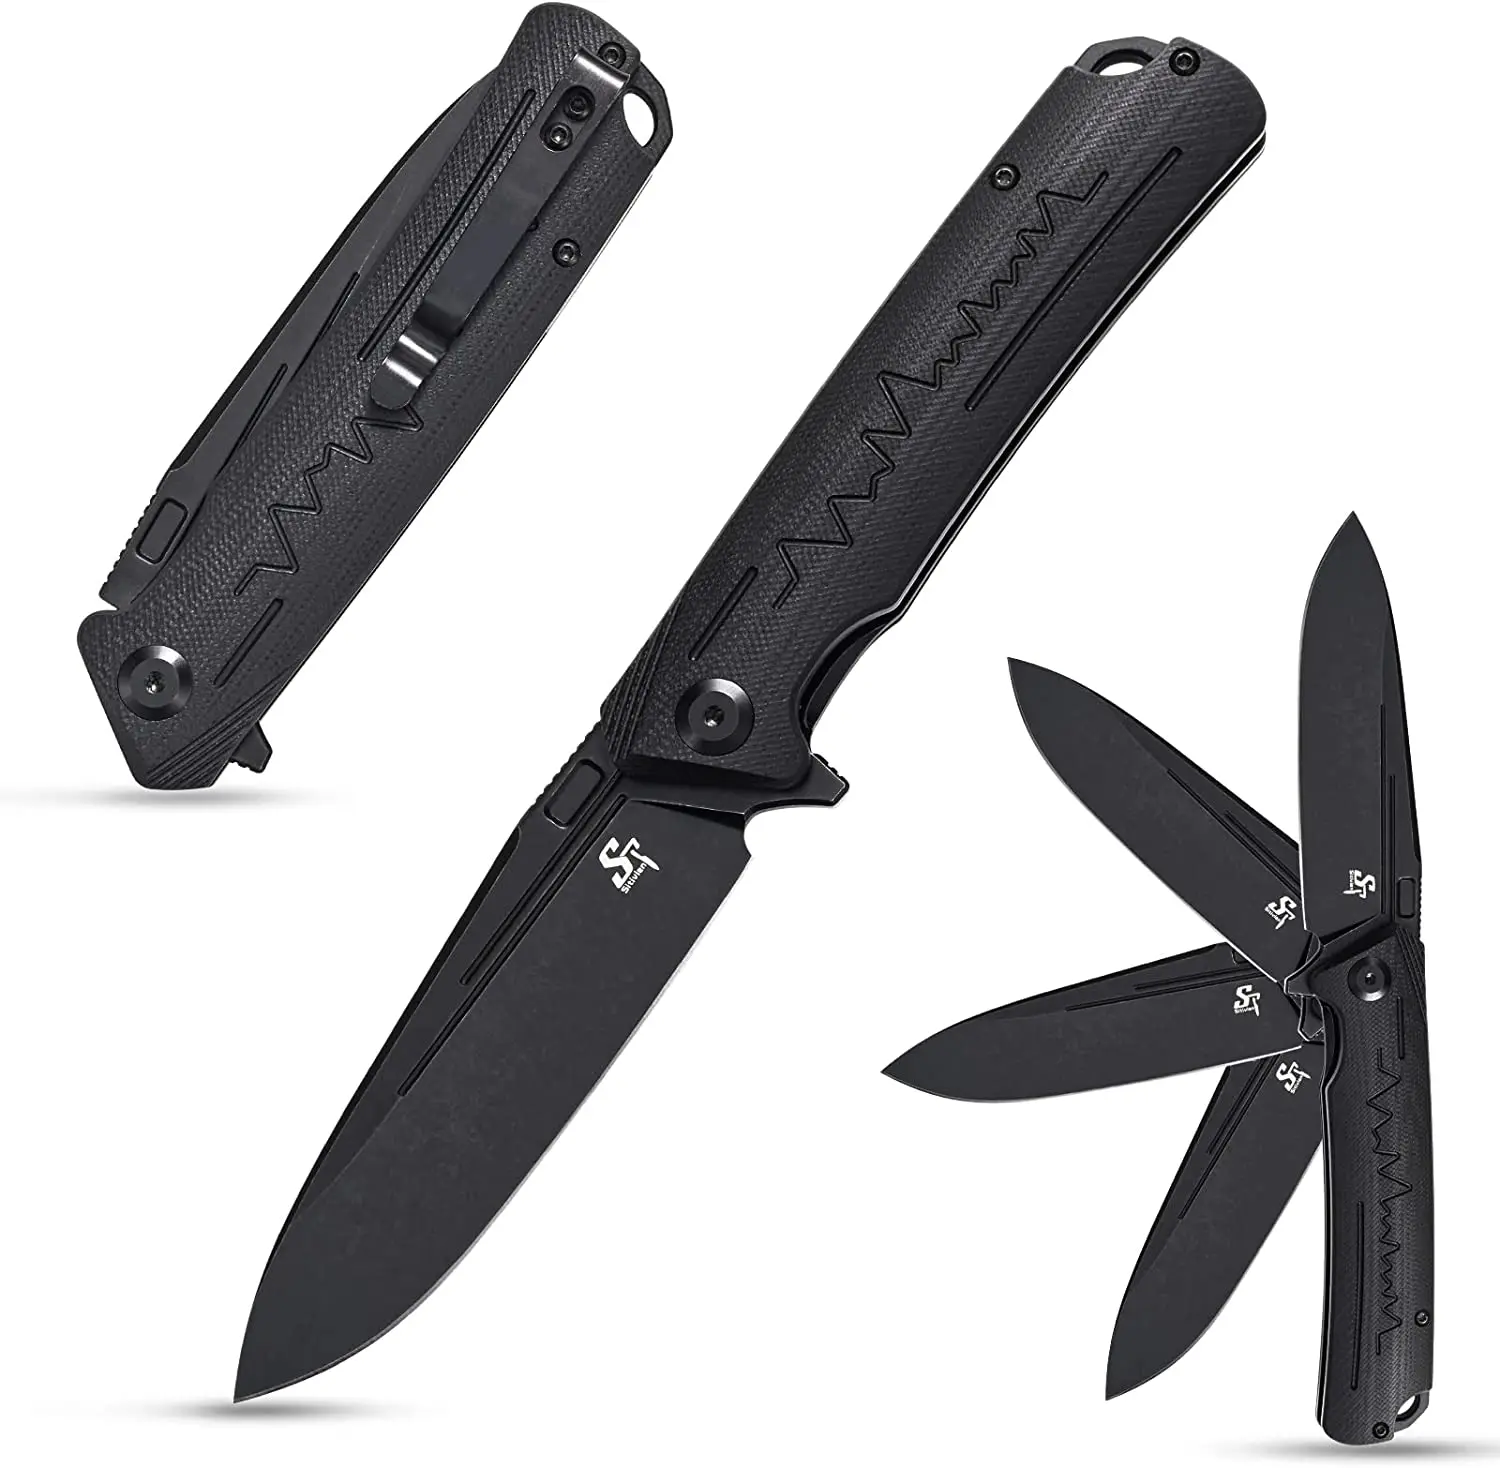 

Sitivien ST136 Folding Knife,D2 Steel Blade ,G10 Handle EDC Tool Knifes Pocket Knives for Home Using Camping Survival Working